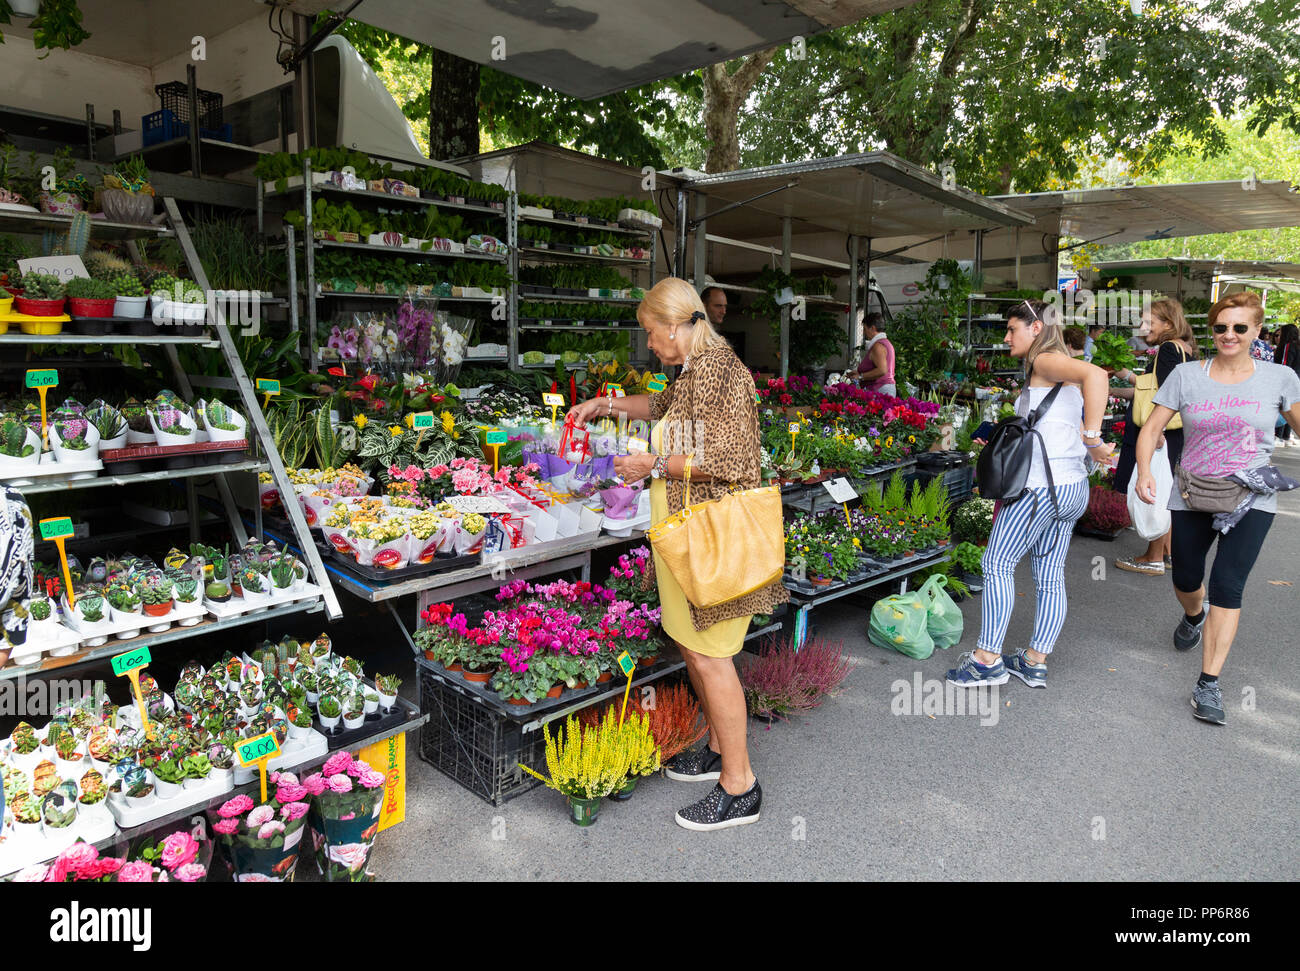 A woman buying flowers in Siena market, Siena, Tuscany Italy Europe Stock Photo